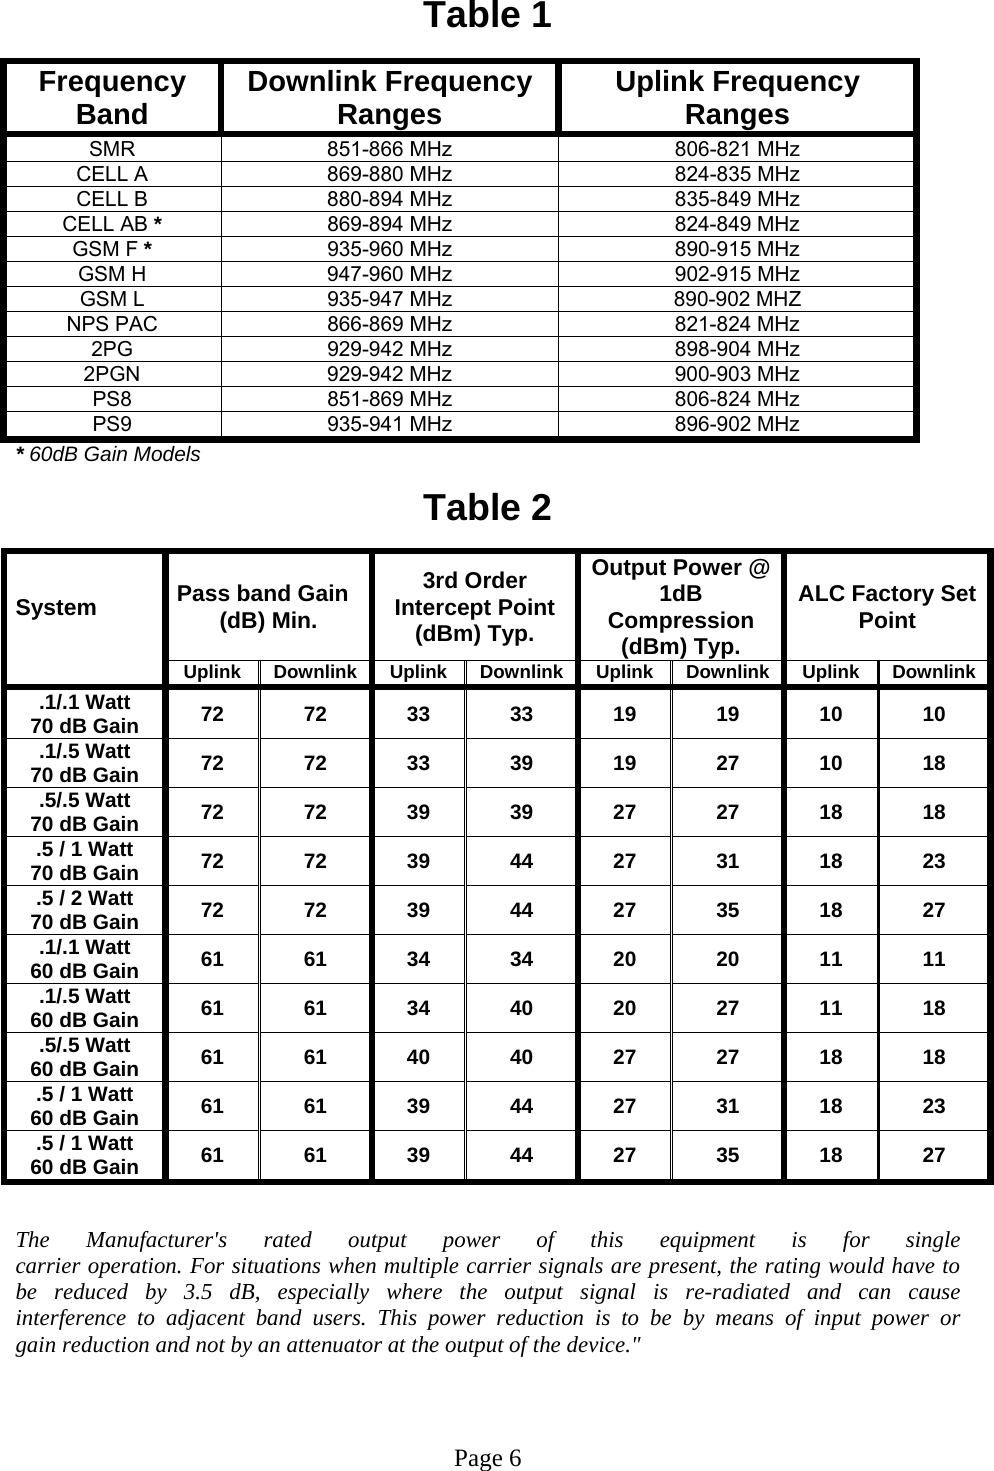 Table 1  Frequency Band  Downlink Frequency Ranges   Uplink Frequency Ranges SMR  851-866 MHz  806-821 MHz CELL A  869-880 MHz  824-835 MHz CELL B  880-894 MHz  835-849 MHz CELL AB *  869-894 MHz  824-849 MHz GSM F *  935-960 MHz  890-915 MHz GSM H  947-960 MHz  902-915 MHz GSM L  935-947 MHz  890-902 MHZ NPS PAC  866-869 MHz  821-824 MHz 2PG  929-942 MHz  898-904 MHz 2PGN  929-942 MHz  900-903 MHz PS8  851-869 MHz  806-824 MHz PS9  935-941 MHz  896-902 MHz * 60dB Gain Models   Table 2  System  Pass band Gain (dB) Min. 3rd Order Intercept Point (dBm) Typ. Output Power @ 1dB Compression (dBm) Typ. ALC Factory Set Point             Uplink Downlink Uplink Downlink Uplink Downlink Uplink Downlink .1/.1 Watt 70 dB Gain  72 72 33 33 19 19 10 10 .1/.5 Watt 70 dB Gain  72 72 33 39 19 27 10 18 .5/.5 Watt 70 dB Gain  72 72 39 39 27 27 18 18 .5 / 1 Watt 70 dB Gain  72 72 39 44 27 31 18 23 .5 / 2 Watt 70 dB Gain  72 72 39 44 27 35 18 27 .1/.1 Watt 60 dB Gain  61 61 34 34 20 20 11 11 .1/.5 Watt 60 dB Gain  61 61 34 40 20 27 11 18 .5/.5 Watt 60 dB Gain  61 61 40 40 27 27 18 18 .5 / 1 Watt 60 dB Gain  61 61 39 44 27 31 18 23 .5 / 1 Watt 60 dB Gain  61 61 39 44 27 35 18 27   The Manufacturer&apos;s rated output power of this equipment is for single  carrier operation. For situations when multiple carrier signals are present, the rating would have to be reduced by 3.5 dB, especially where the output signal is re-radiated and can cause  interference to adjacent band users. This power reduction is to be by means of input power or  gain reduction and not by an attenuator at the output of the device.&quot;    Page 6 